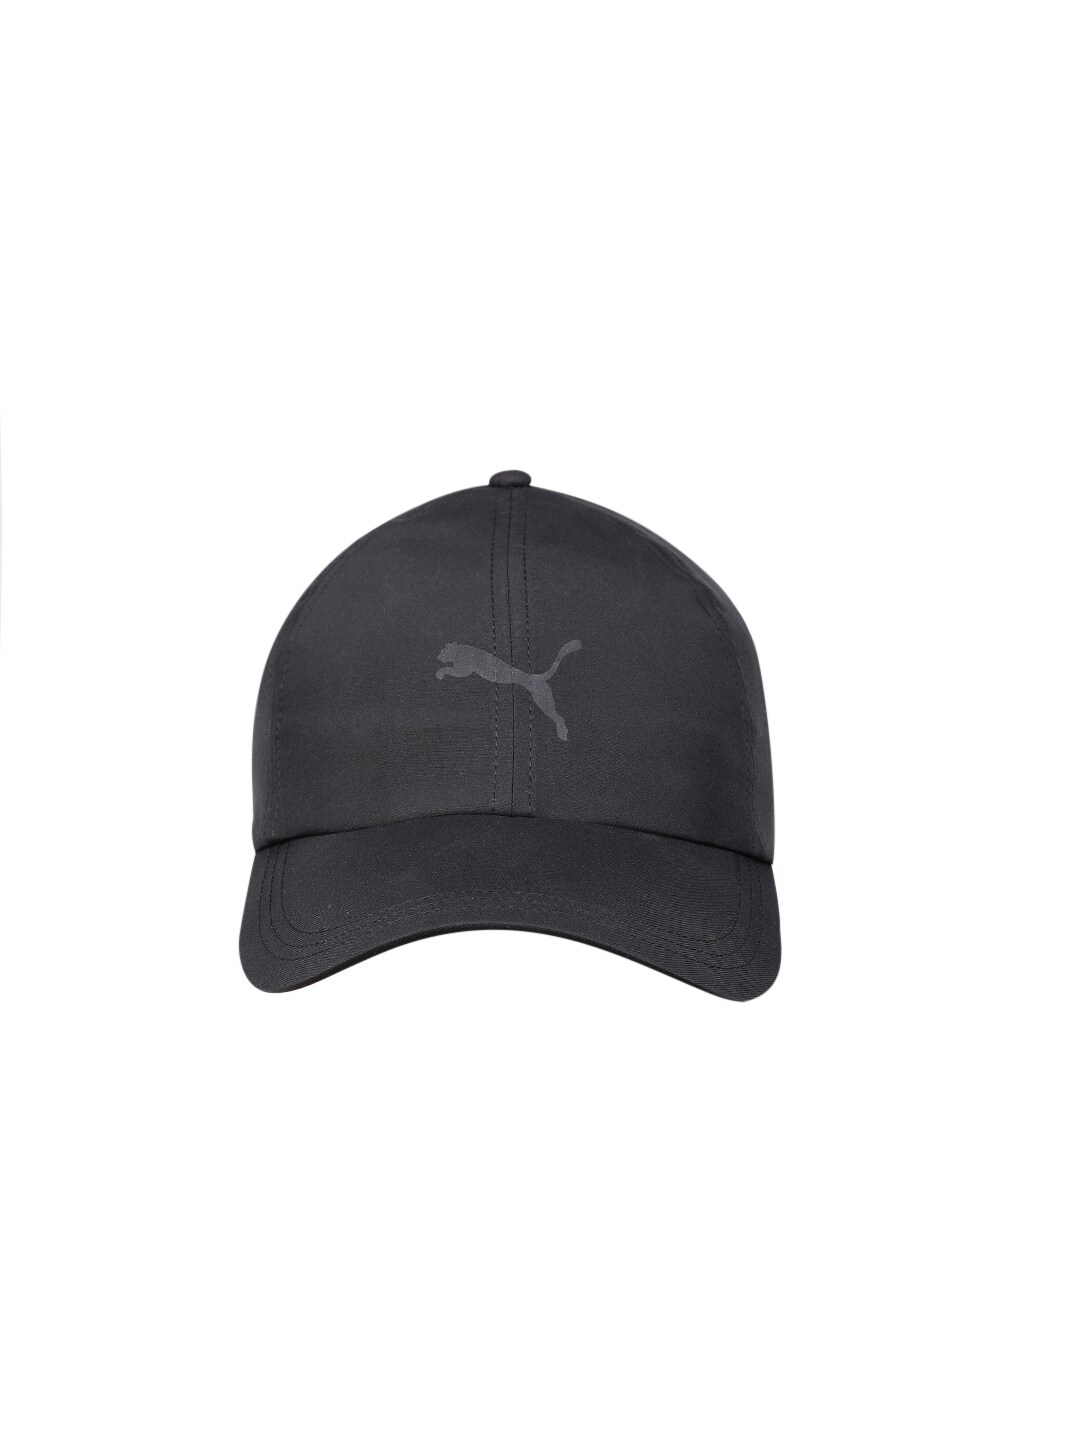 Puma Women Black Solid Running Ponytail Baseball Cap with Cut-Out Detail Price in India